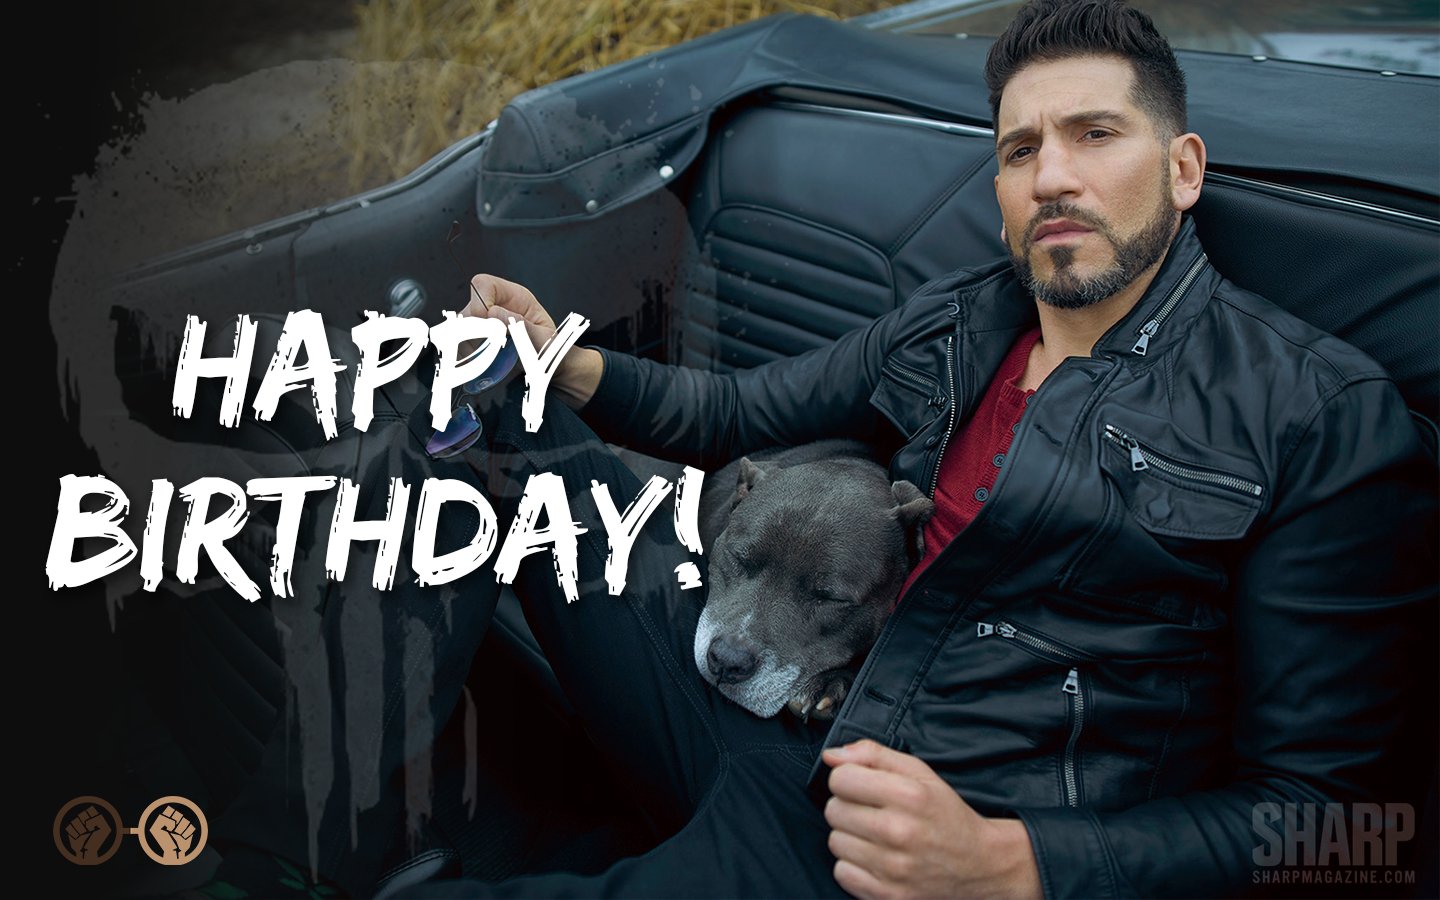 Happy birthday to the badass, Jon Bernthal aka The Punisher! The actor turns 41 years old today! 